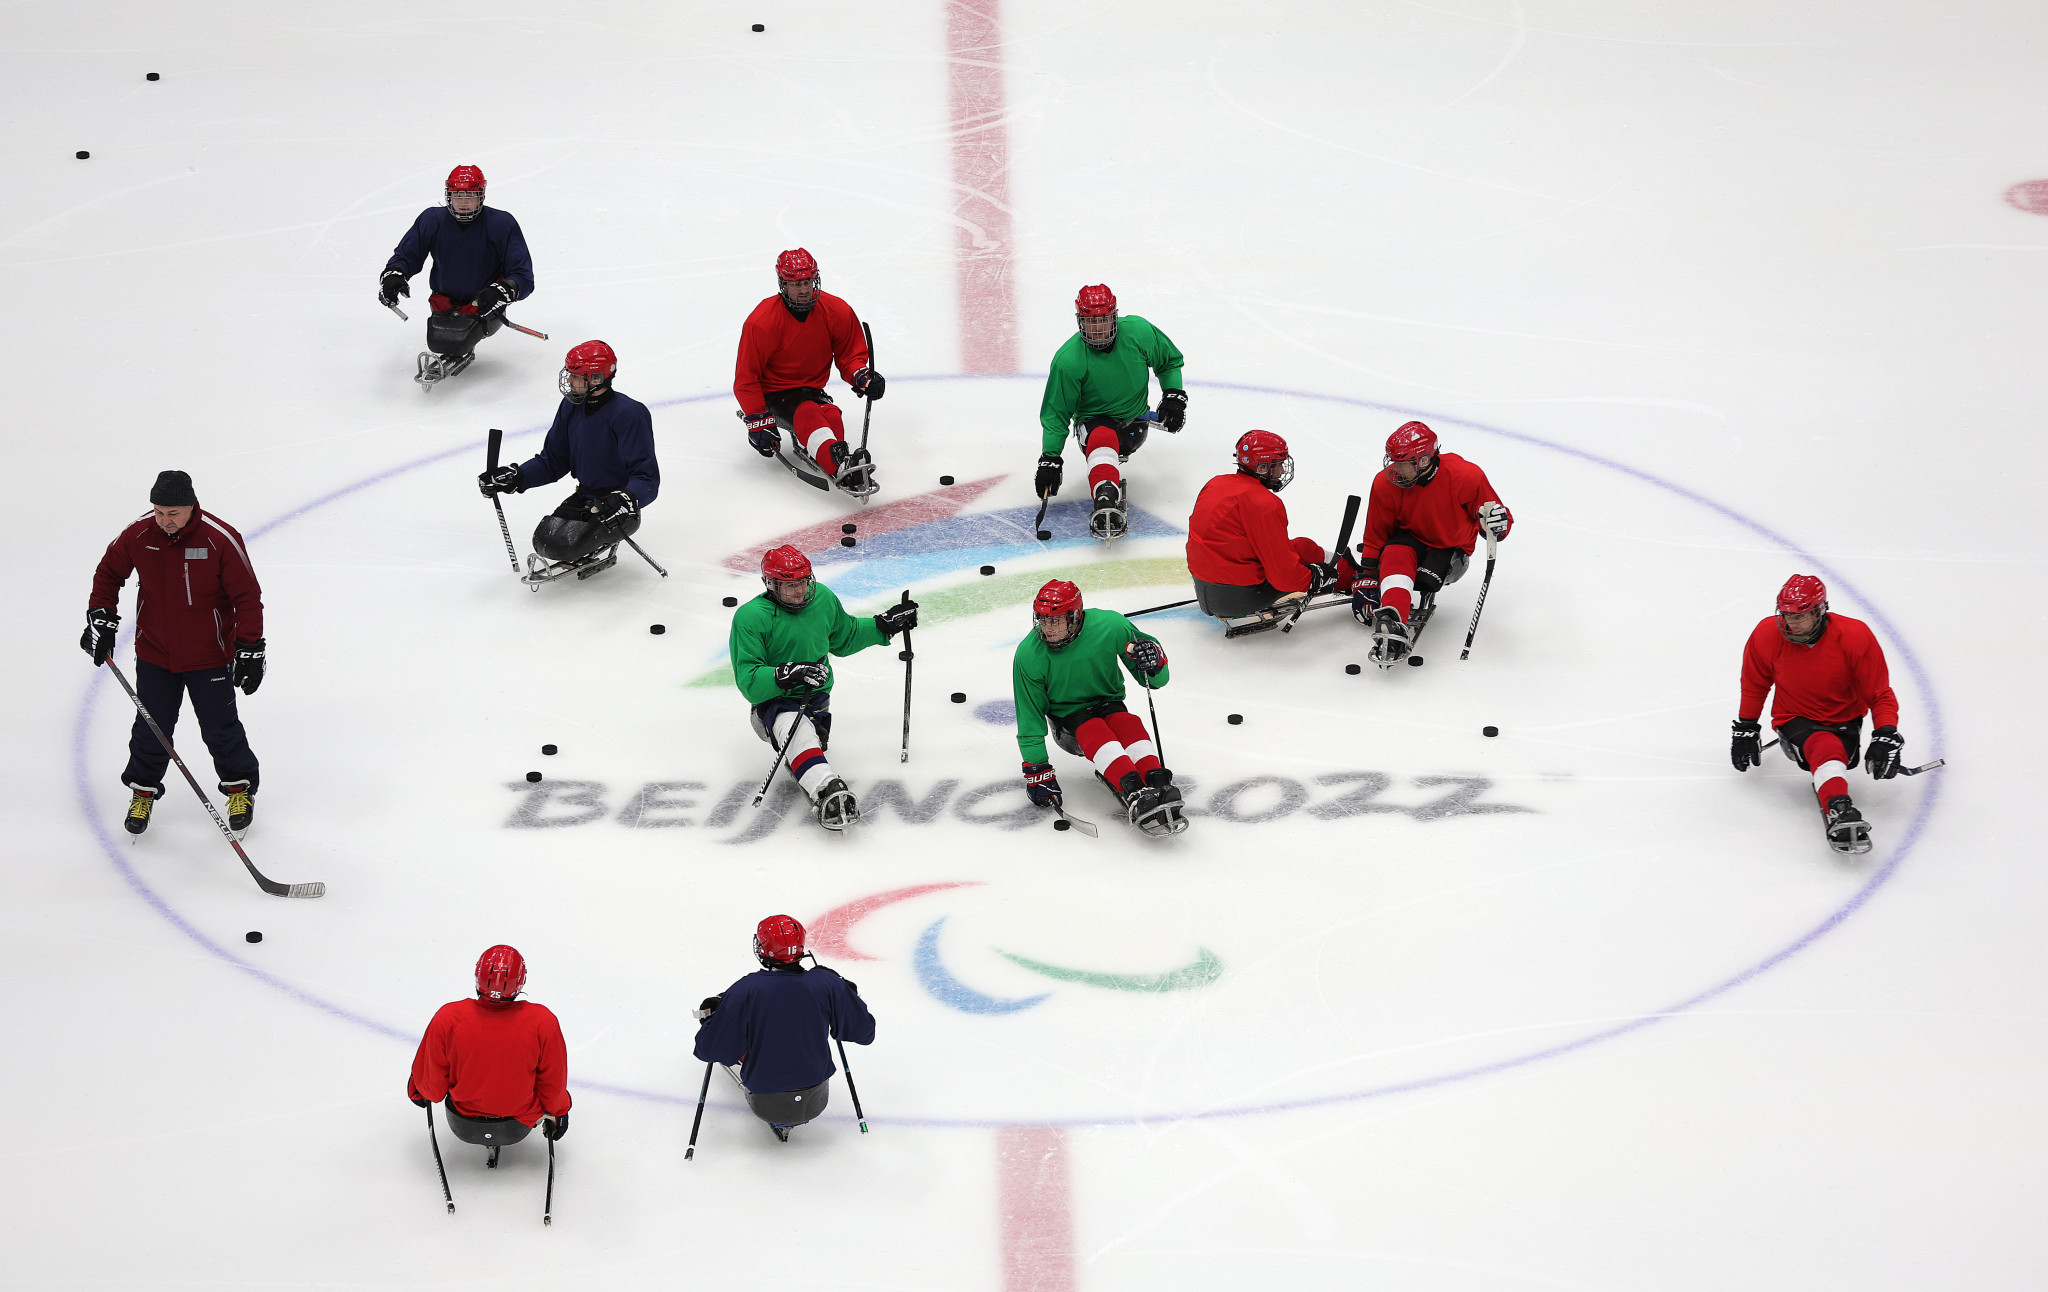 The Russian Paralympic Committee ice hockey team is one of many banned from the Beijing 2022 Paralympics